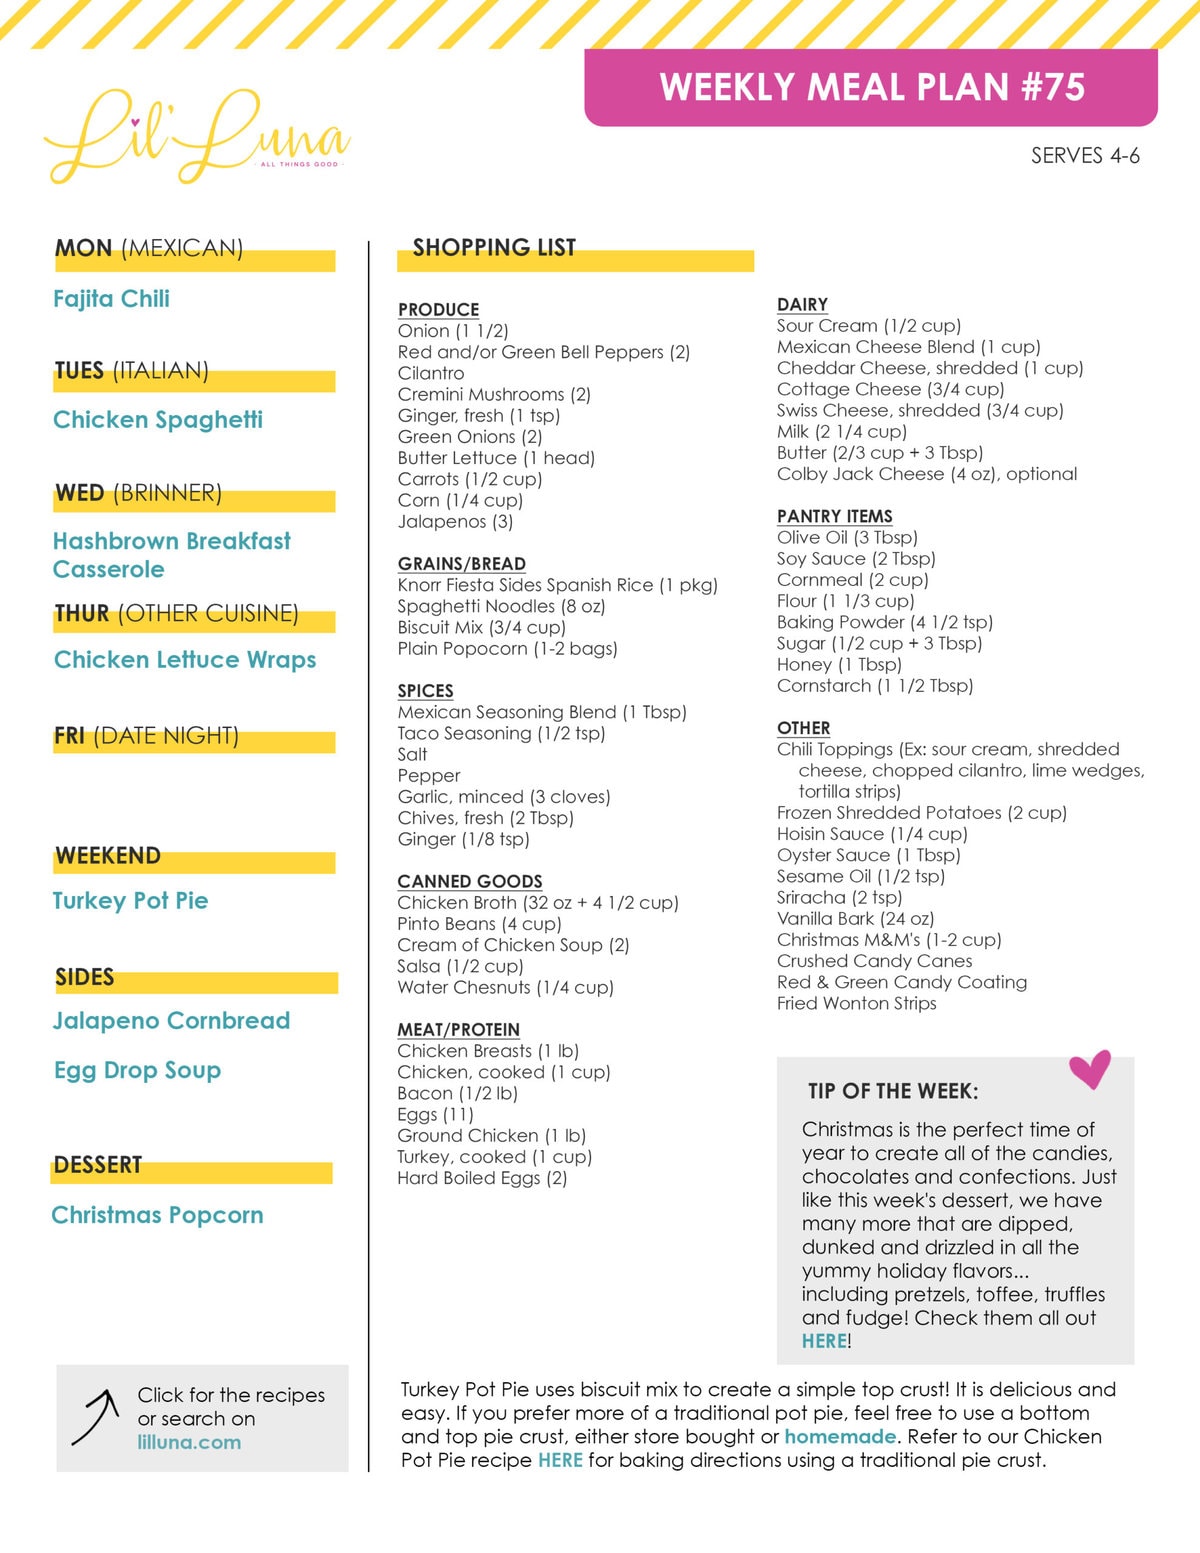 Printable version of Meal Plan #75 with grocery list.